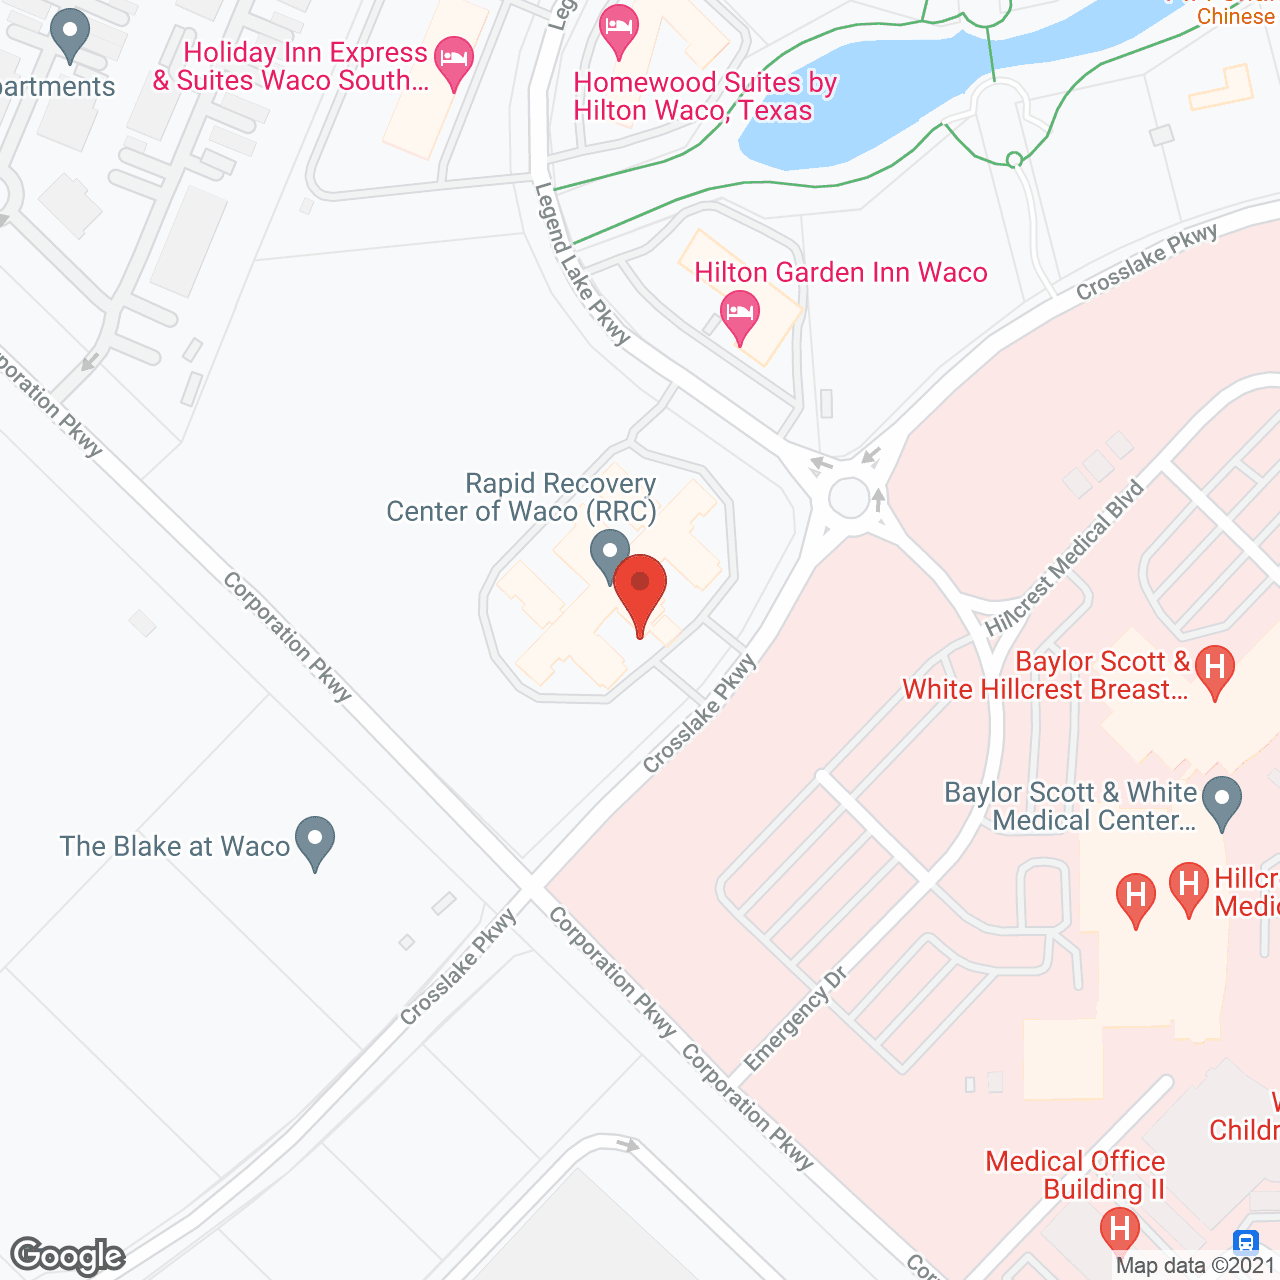 Rapid Recovery Center of Waco in google map